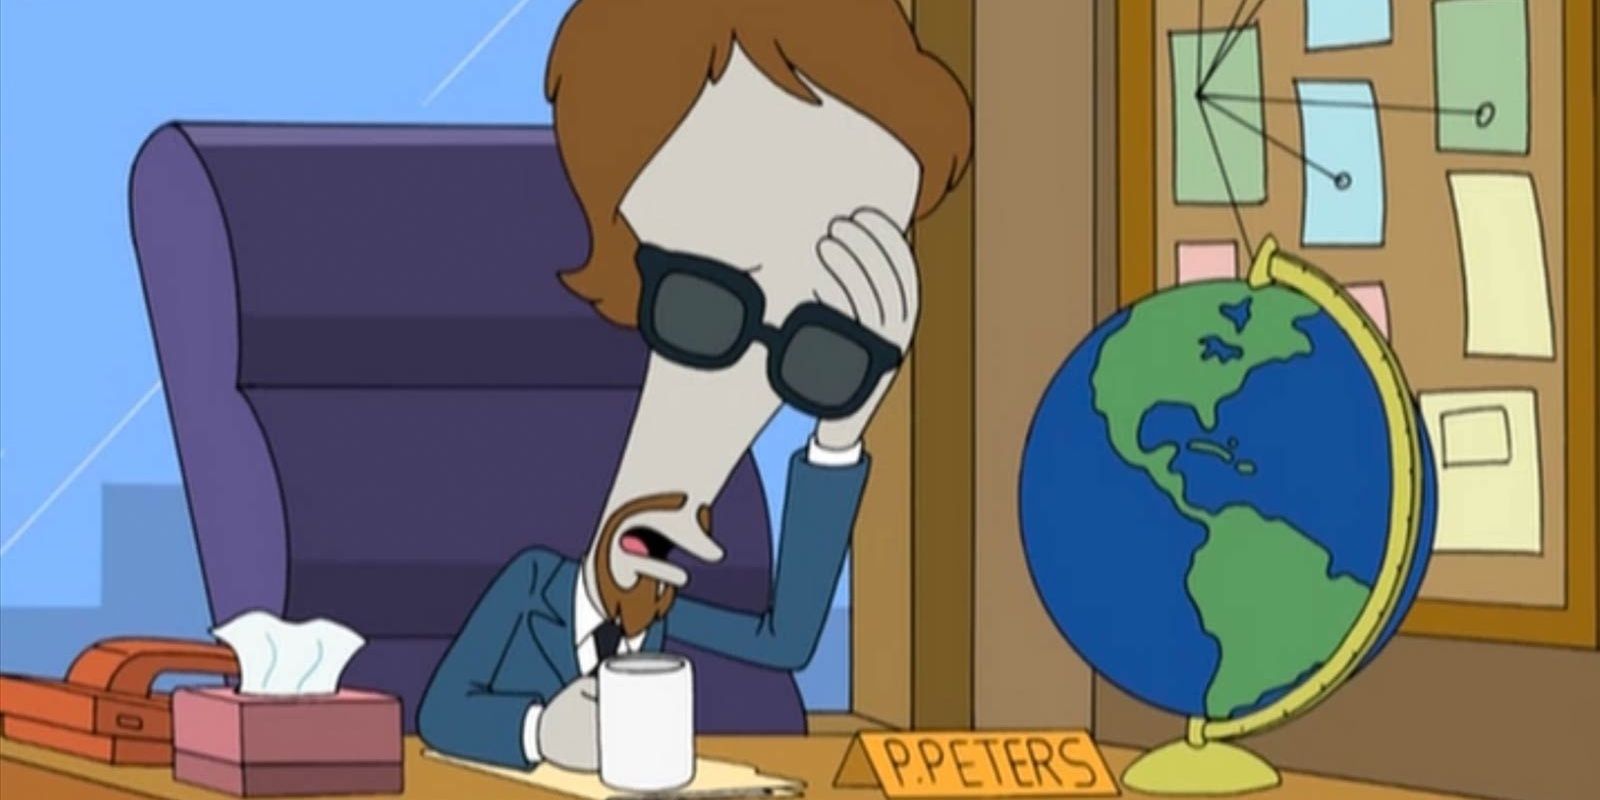 Roger grimaces while hungover at work in American Dad